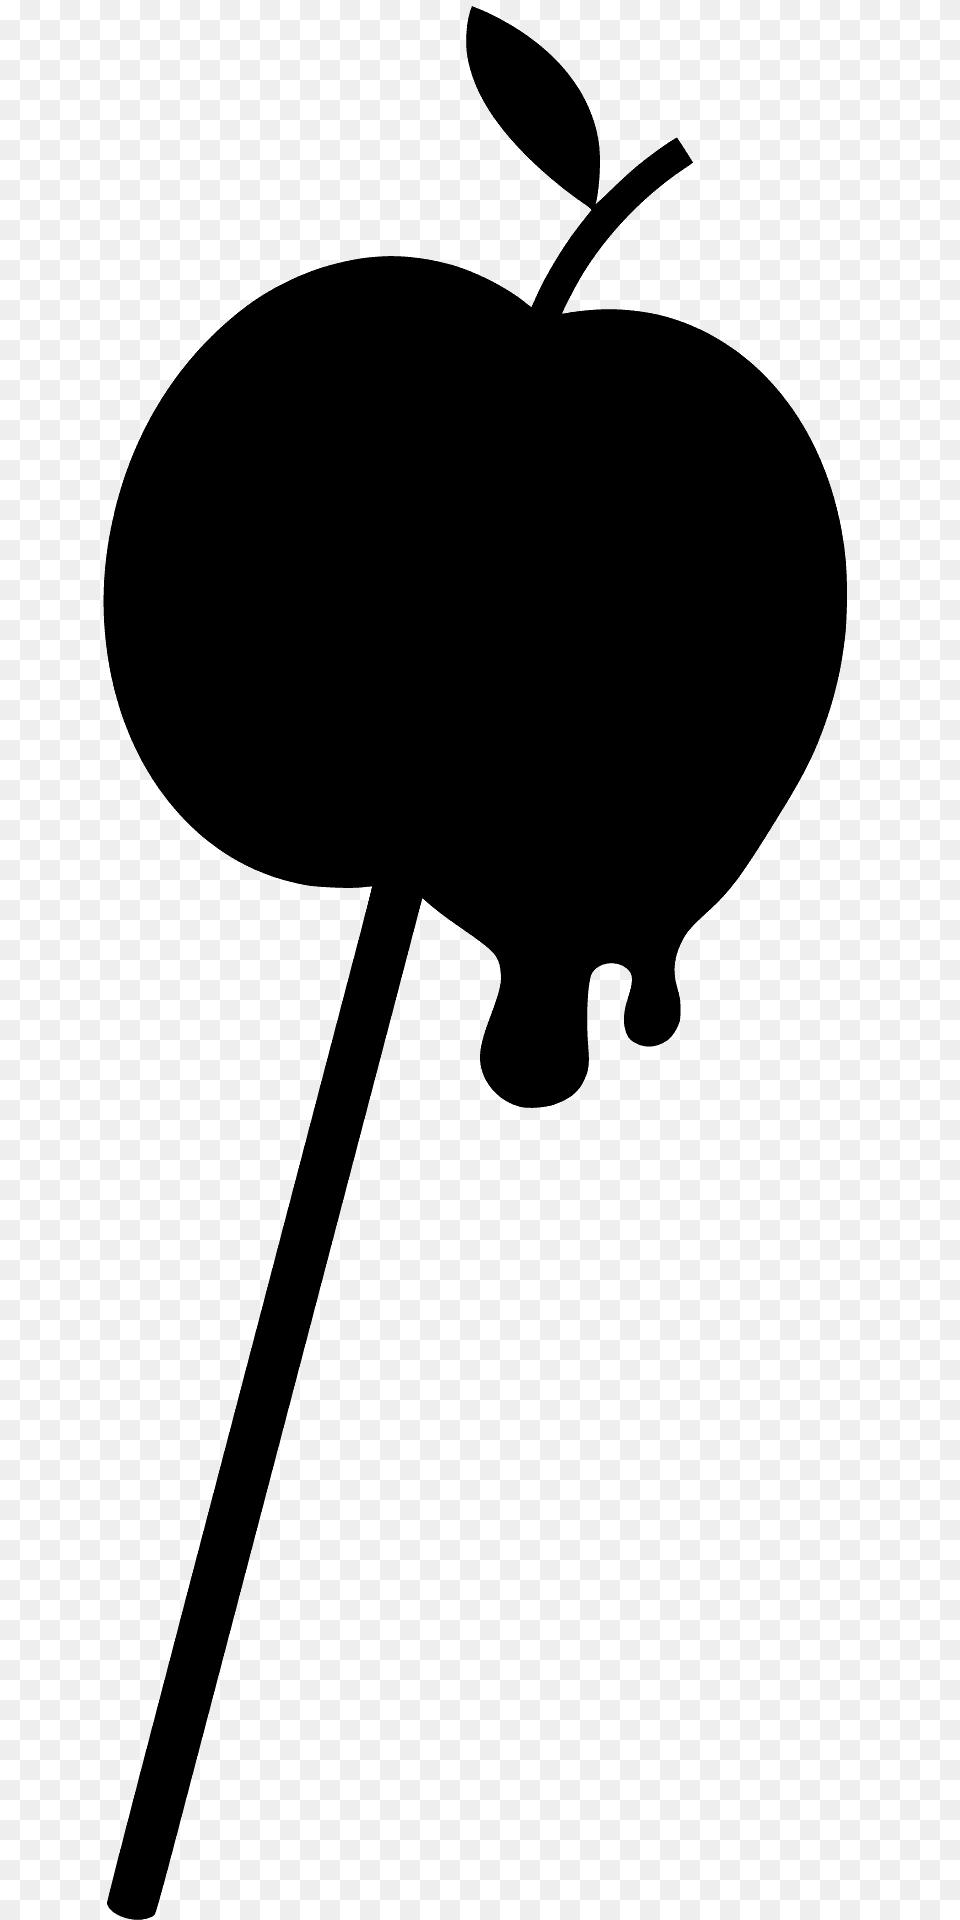 Candy Coated Apple On A Stick Silhouette, Stencil Free Transparent Png